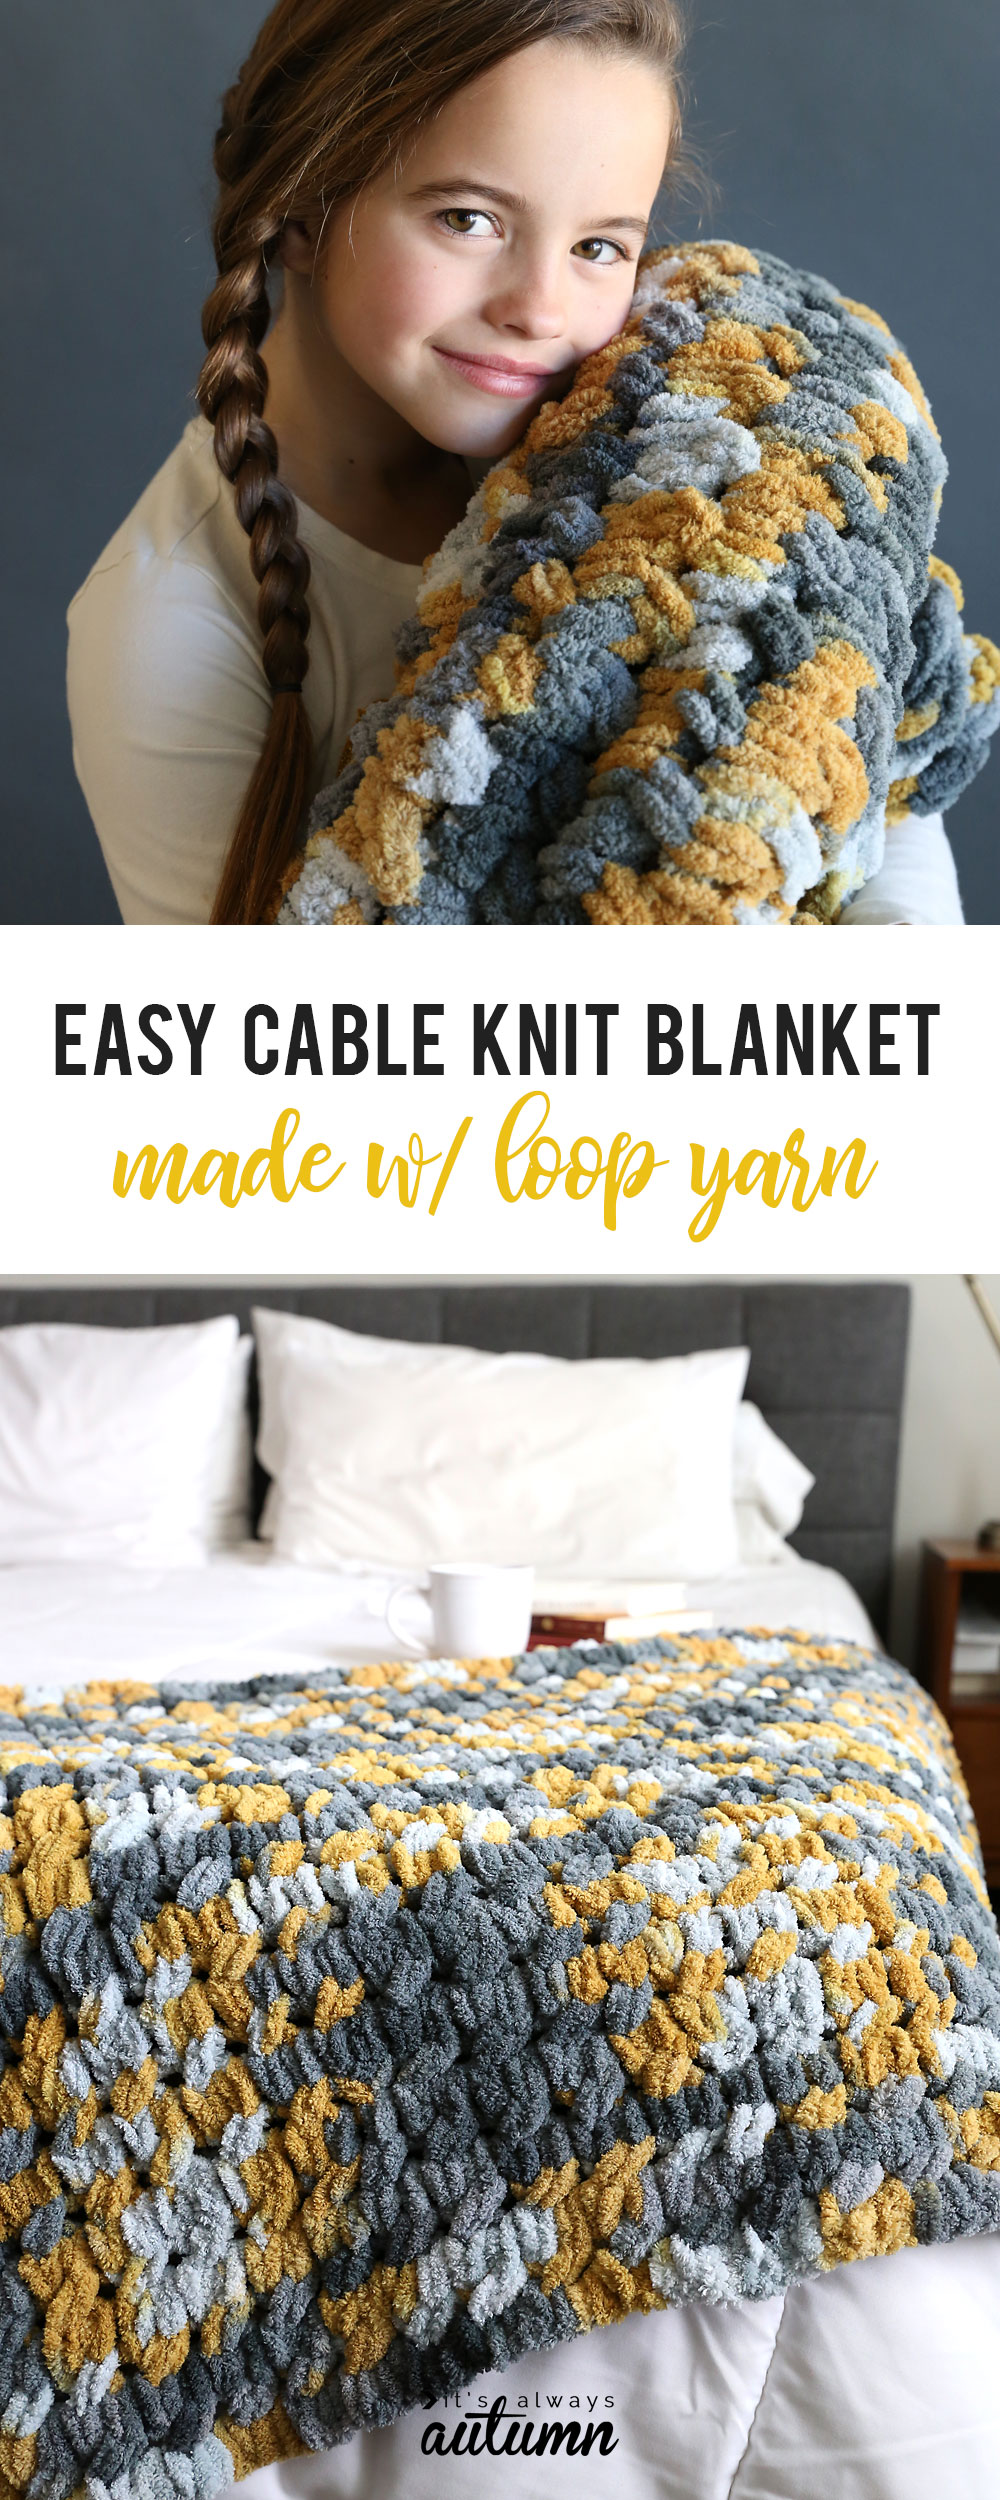 Cable Blanket · How To Stitch A Knit Or Crochet Blanket · Knitting